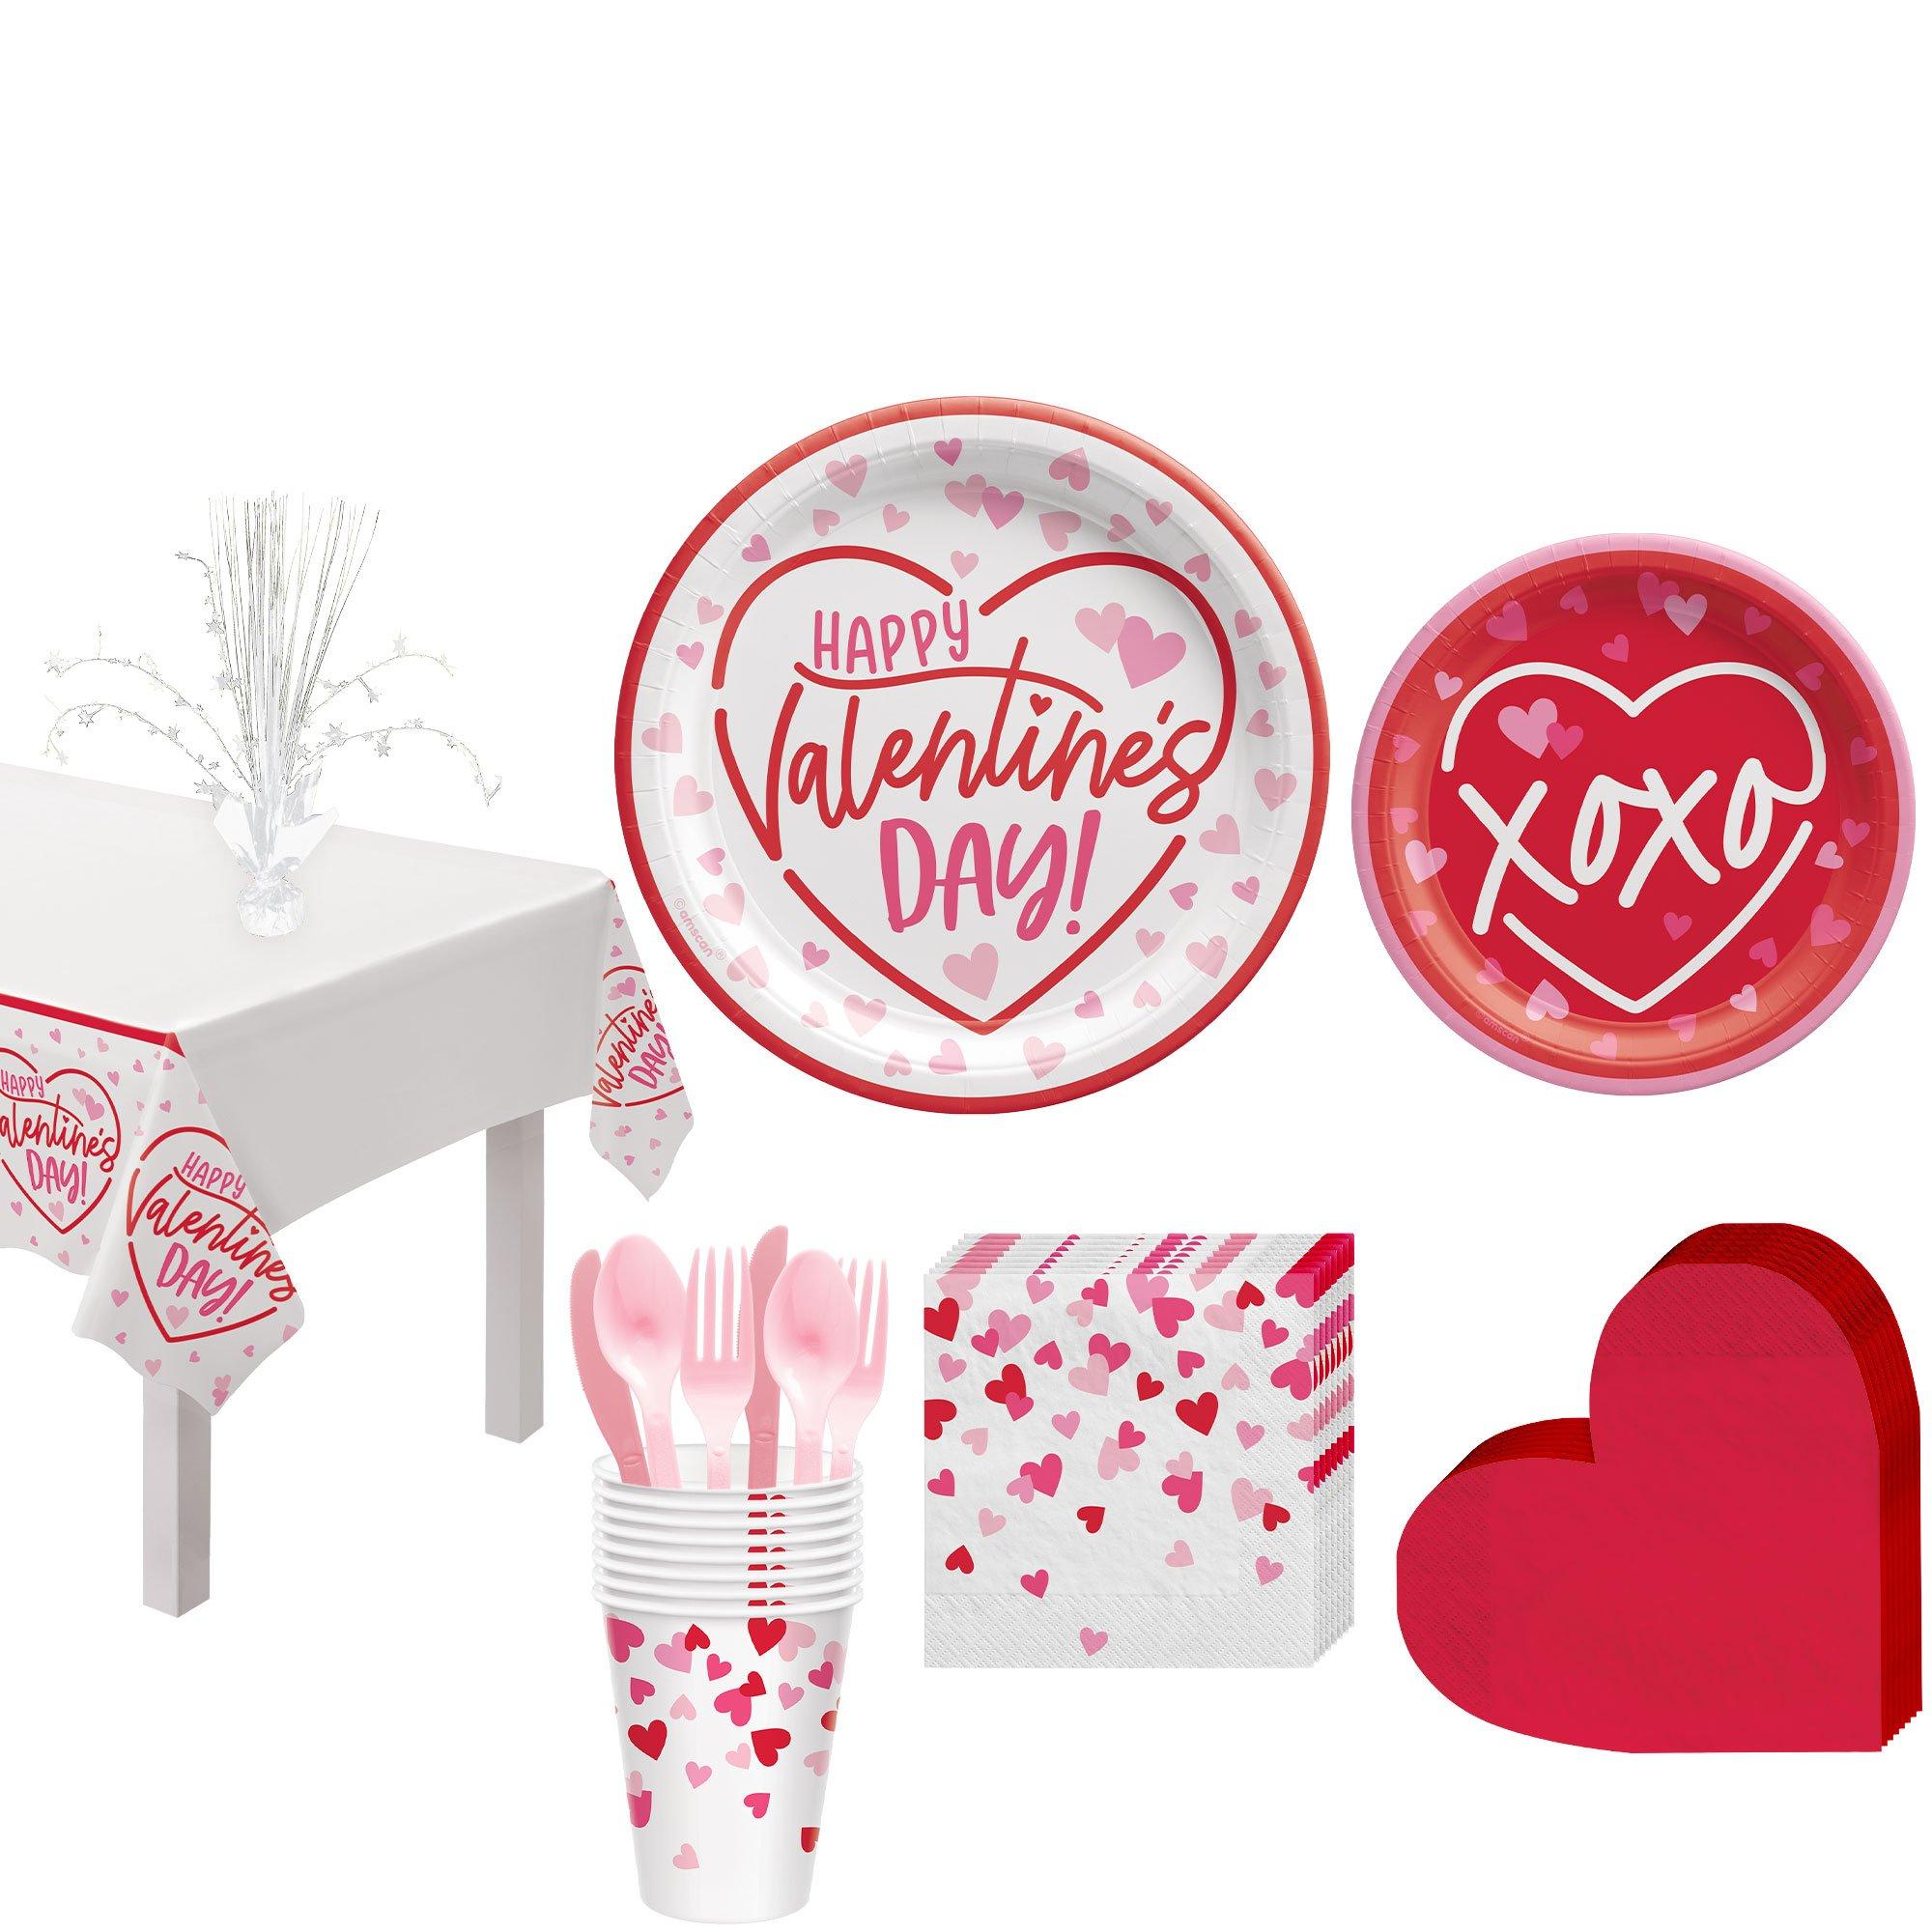 Valentine's Day Tableware - Plates, Cups, Napkins | Party City